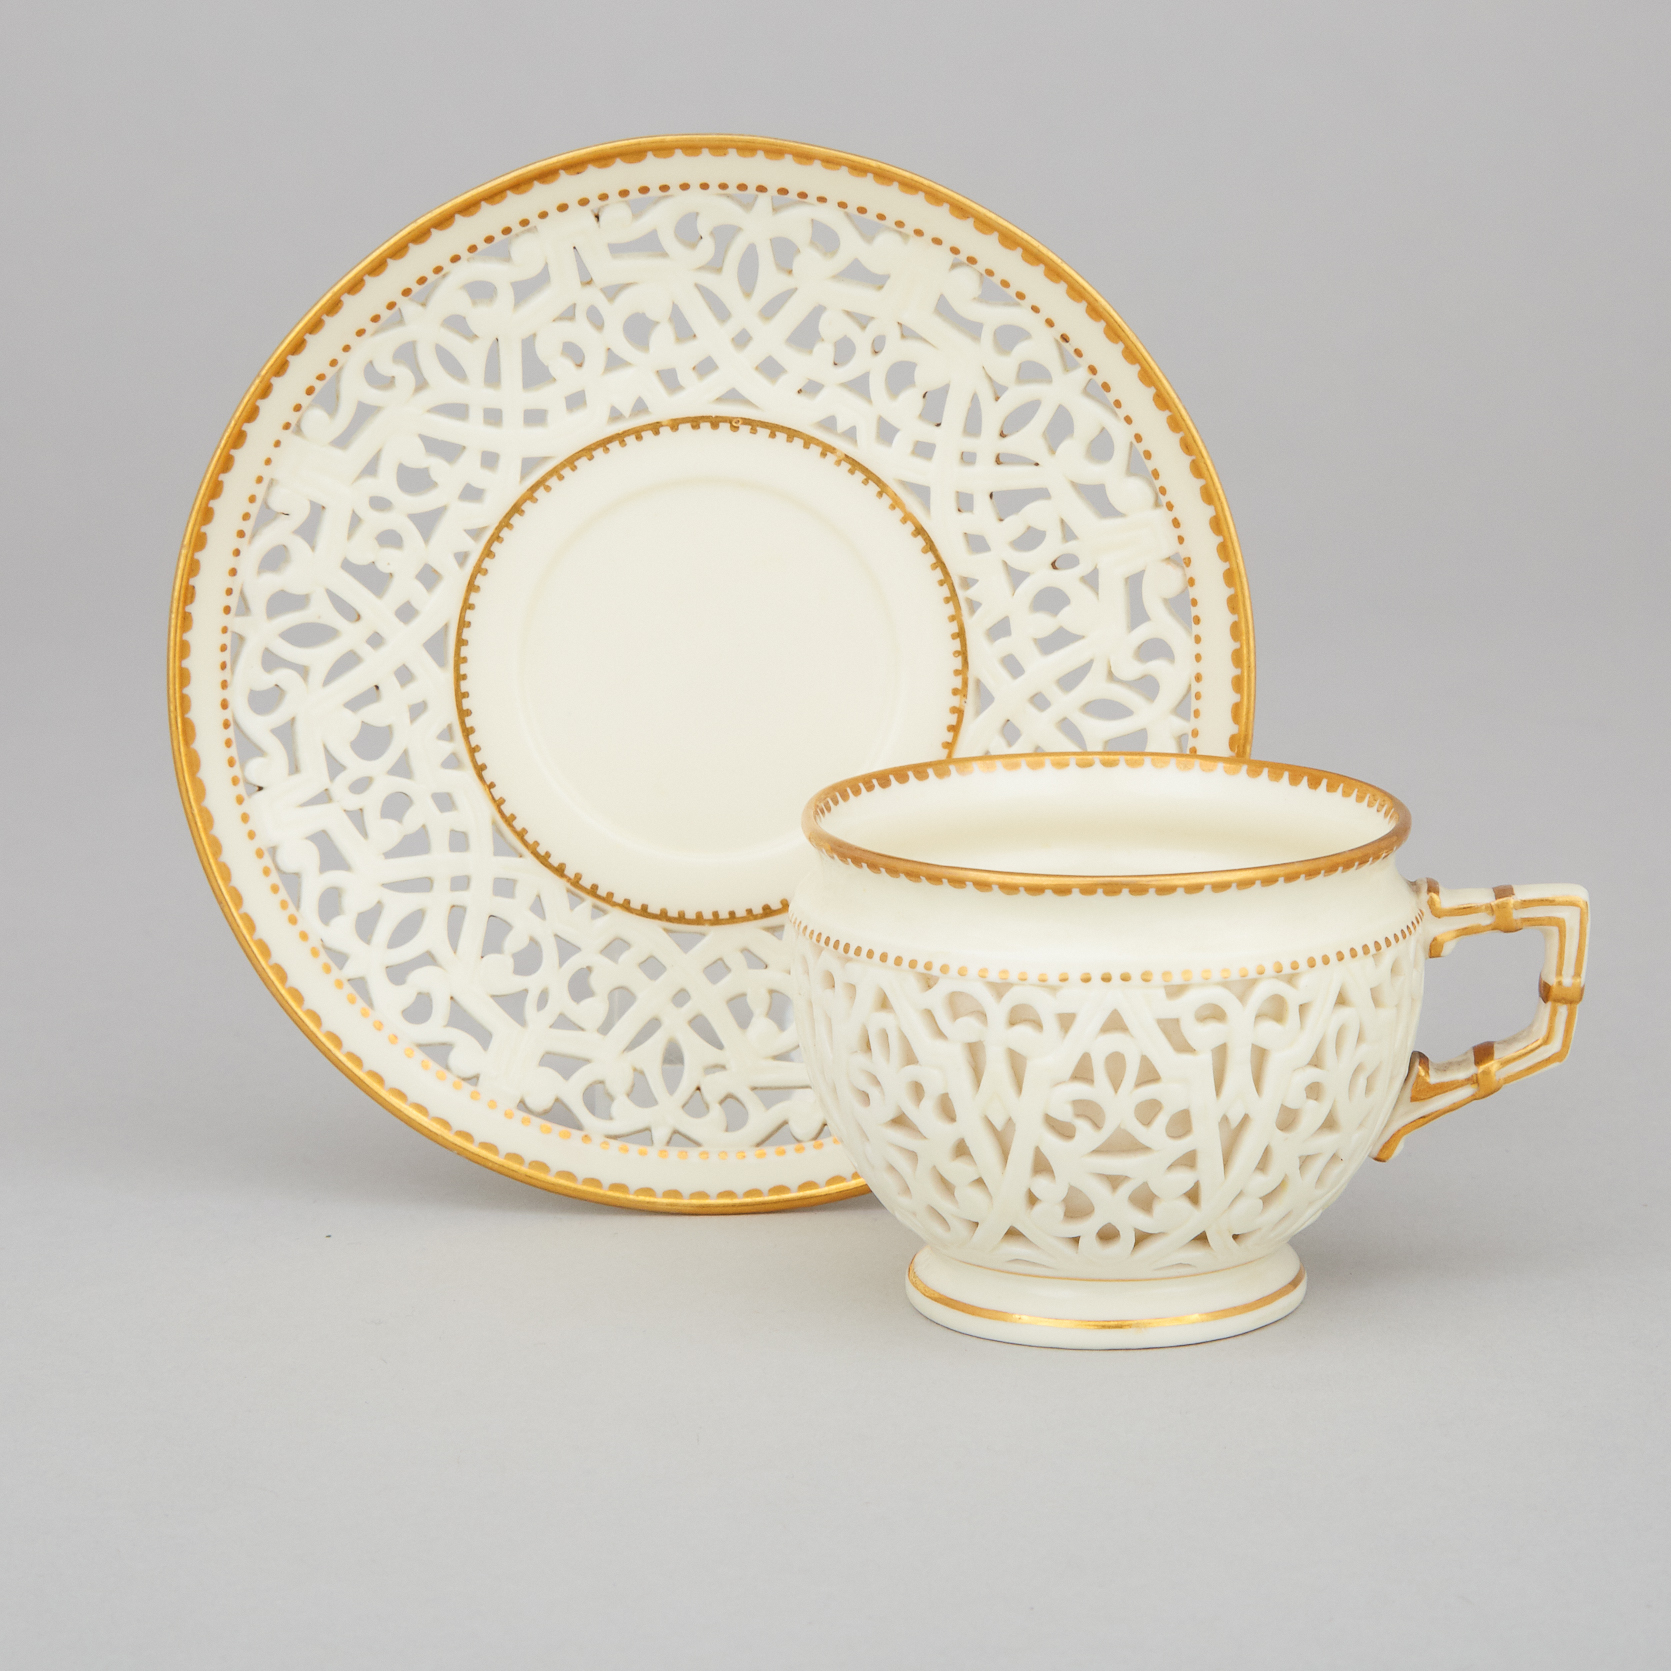 Grainger Worcester Reticulated Cup and Saucer, c.1870-89